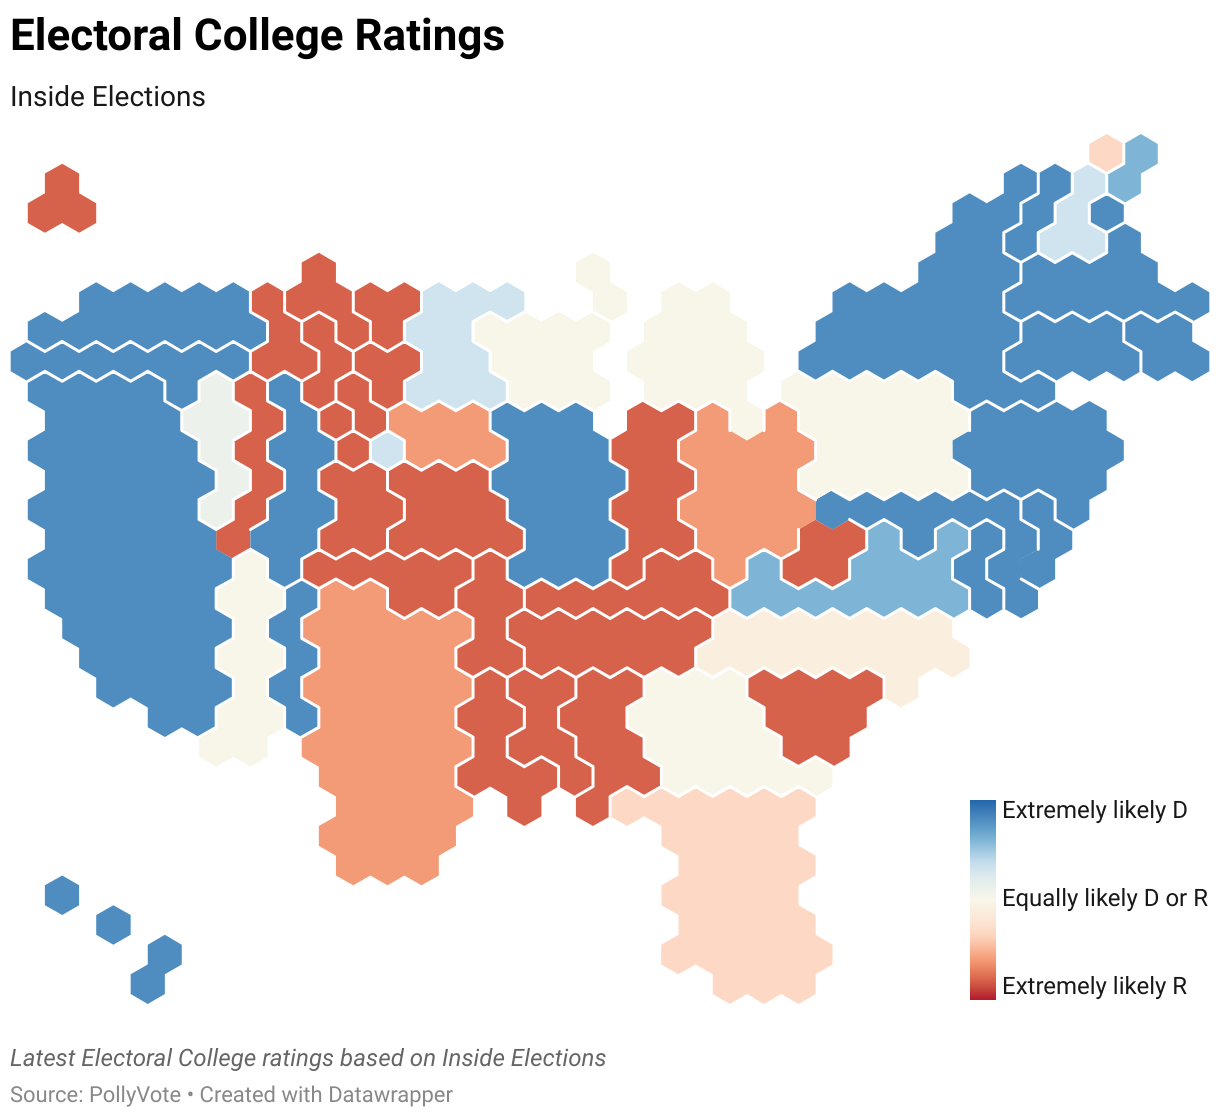 Latest Electoral College ratings based on Inside Elections